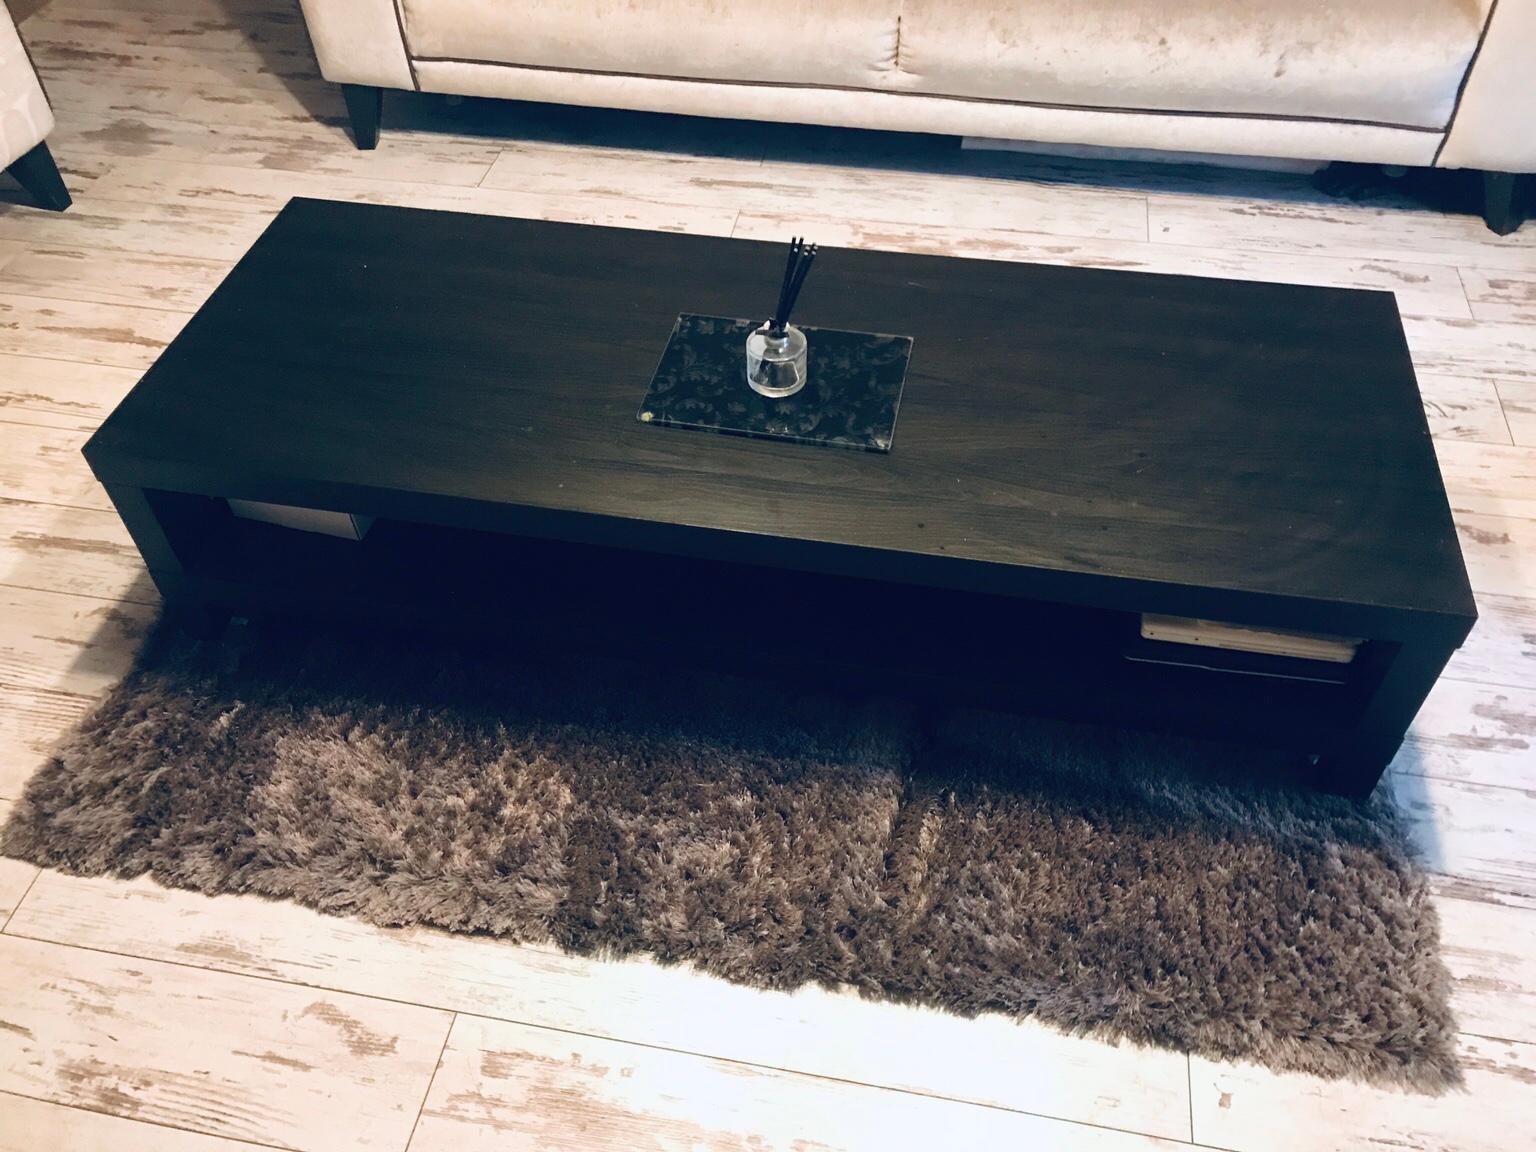 Black Ikea Coffee Table In B23 Birmingham For 20 00 For Sale Shpock